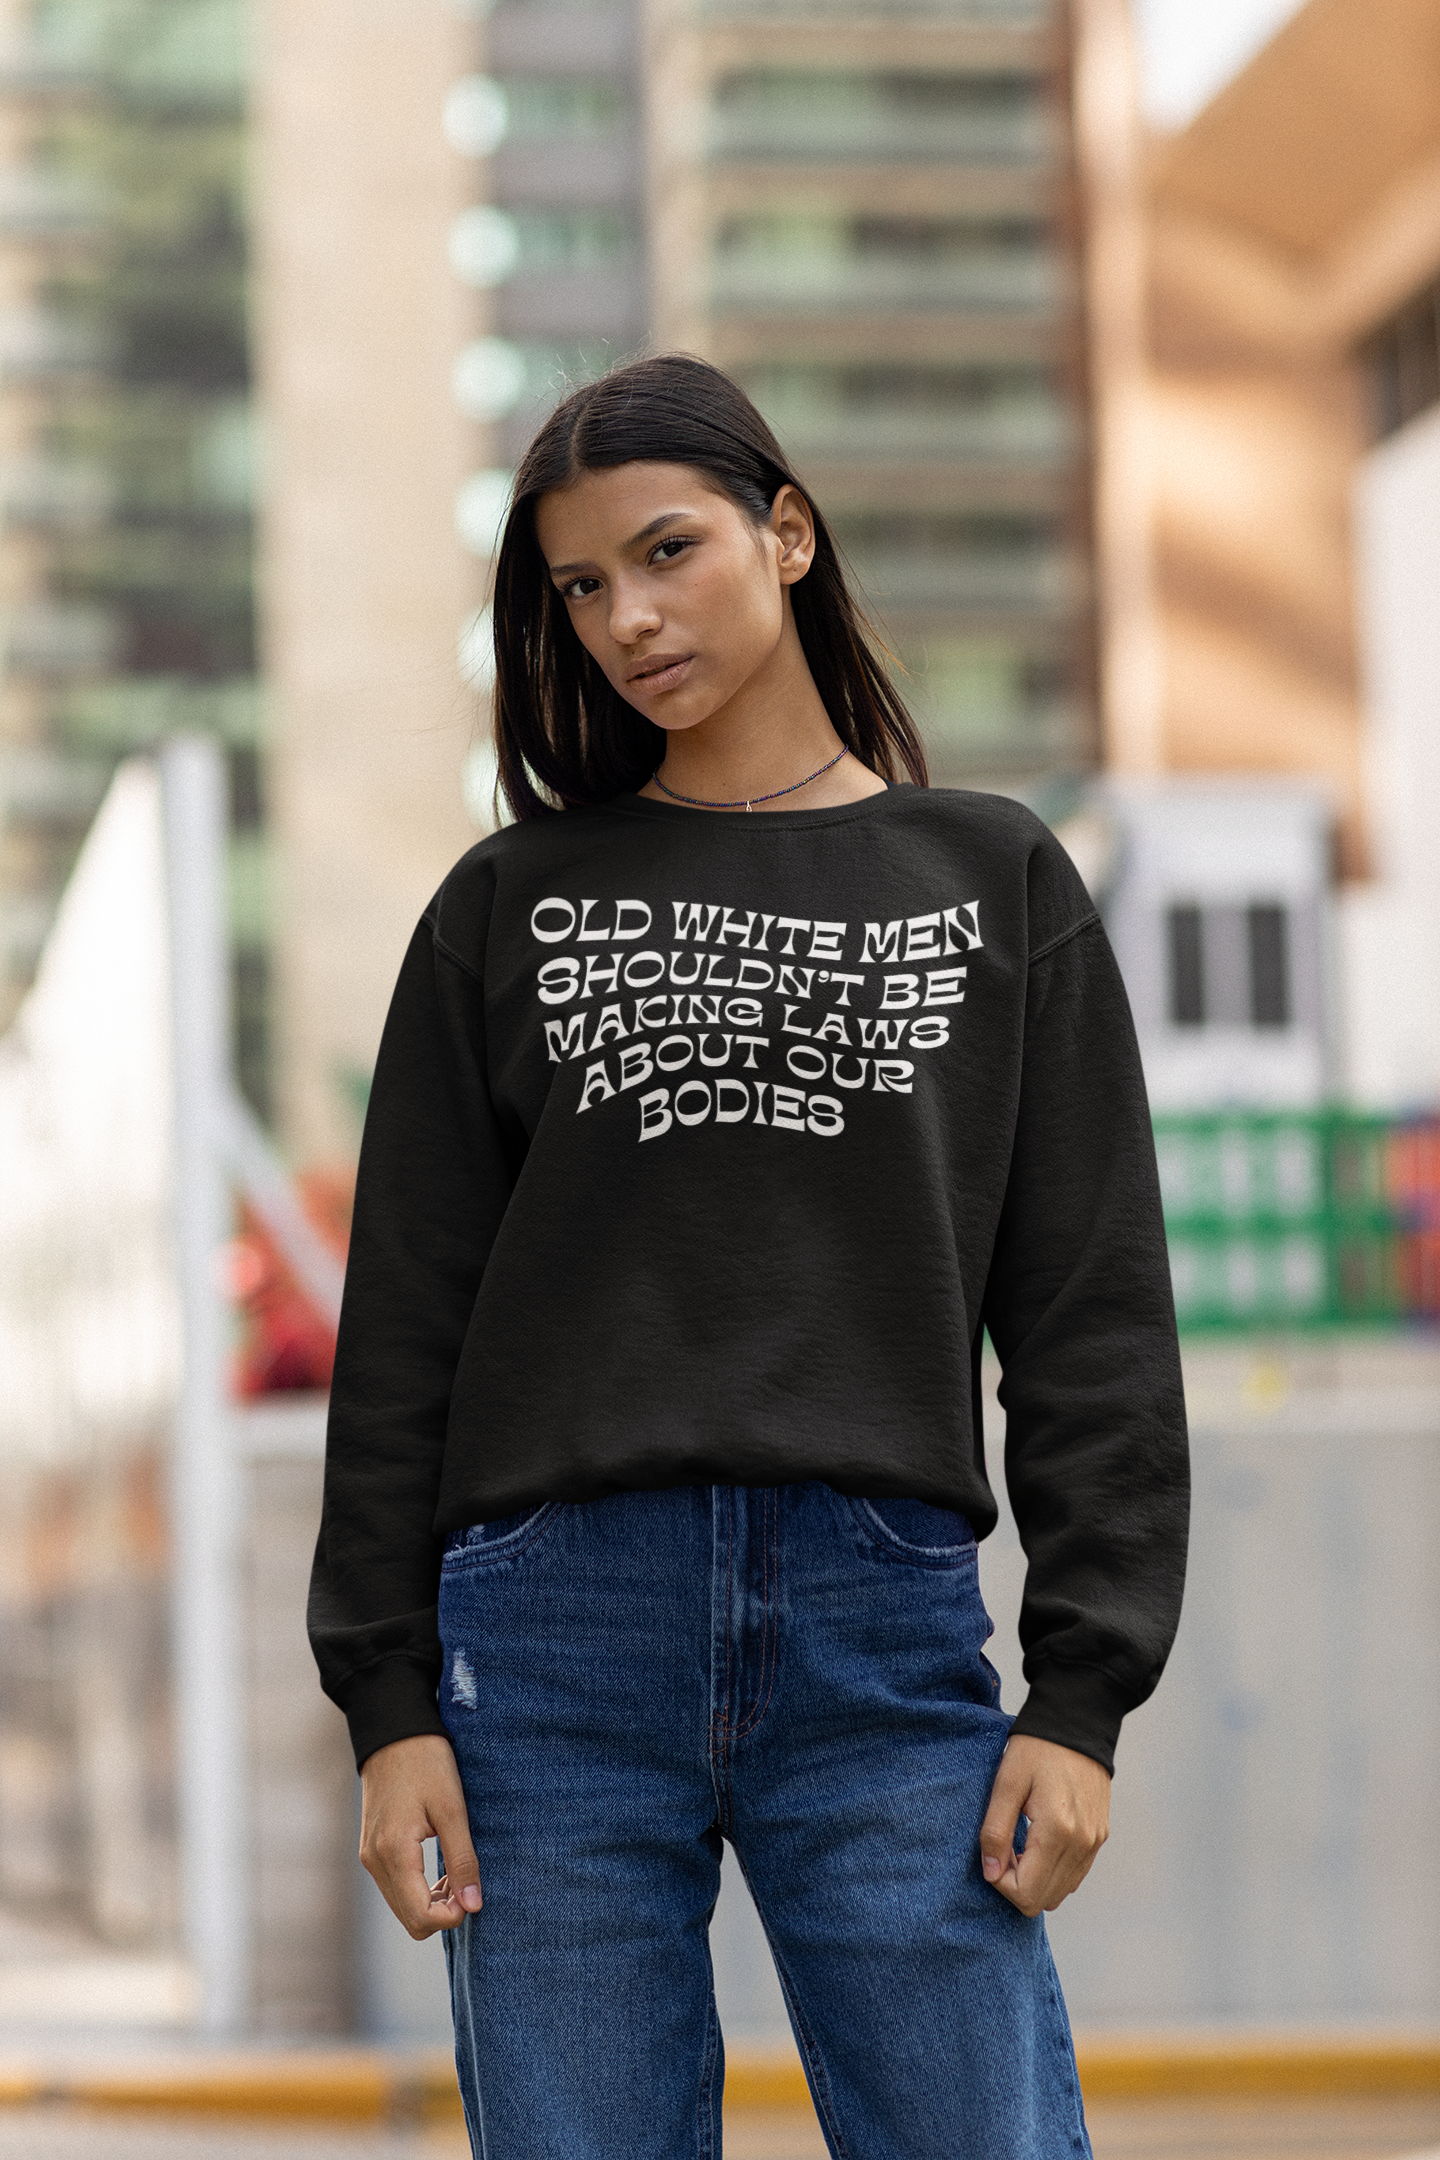 Old White Men Shouldn’t Be Making Laws About Our Bodies Unisex Feminist Sweatshirt- Shop Women’s Rights T-shirts - Feminist Trash Store - Black Women’s Oversized Sweatshirt